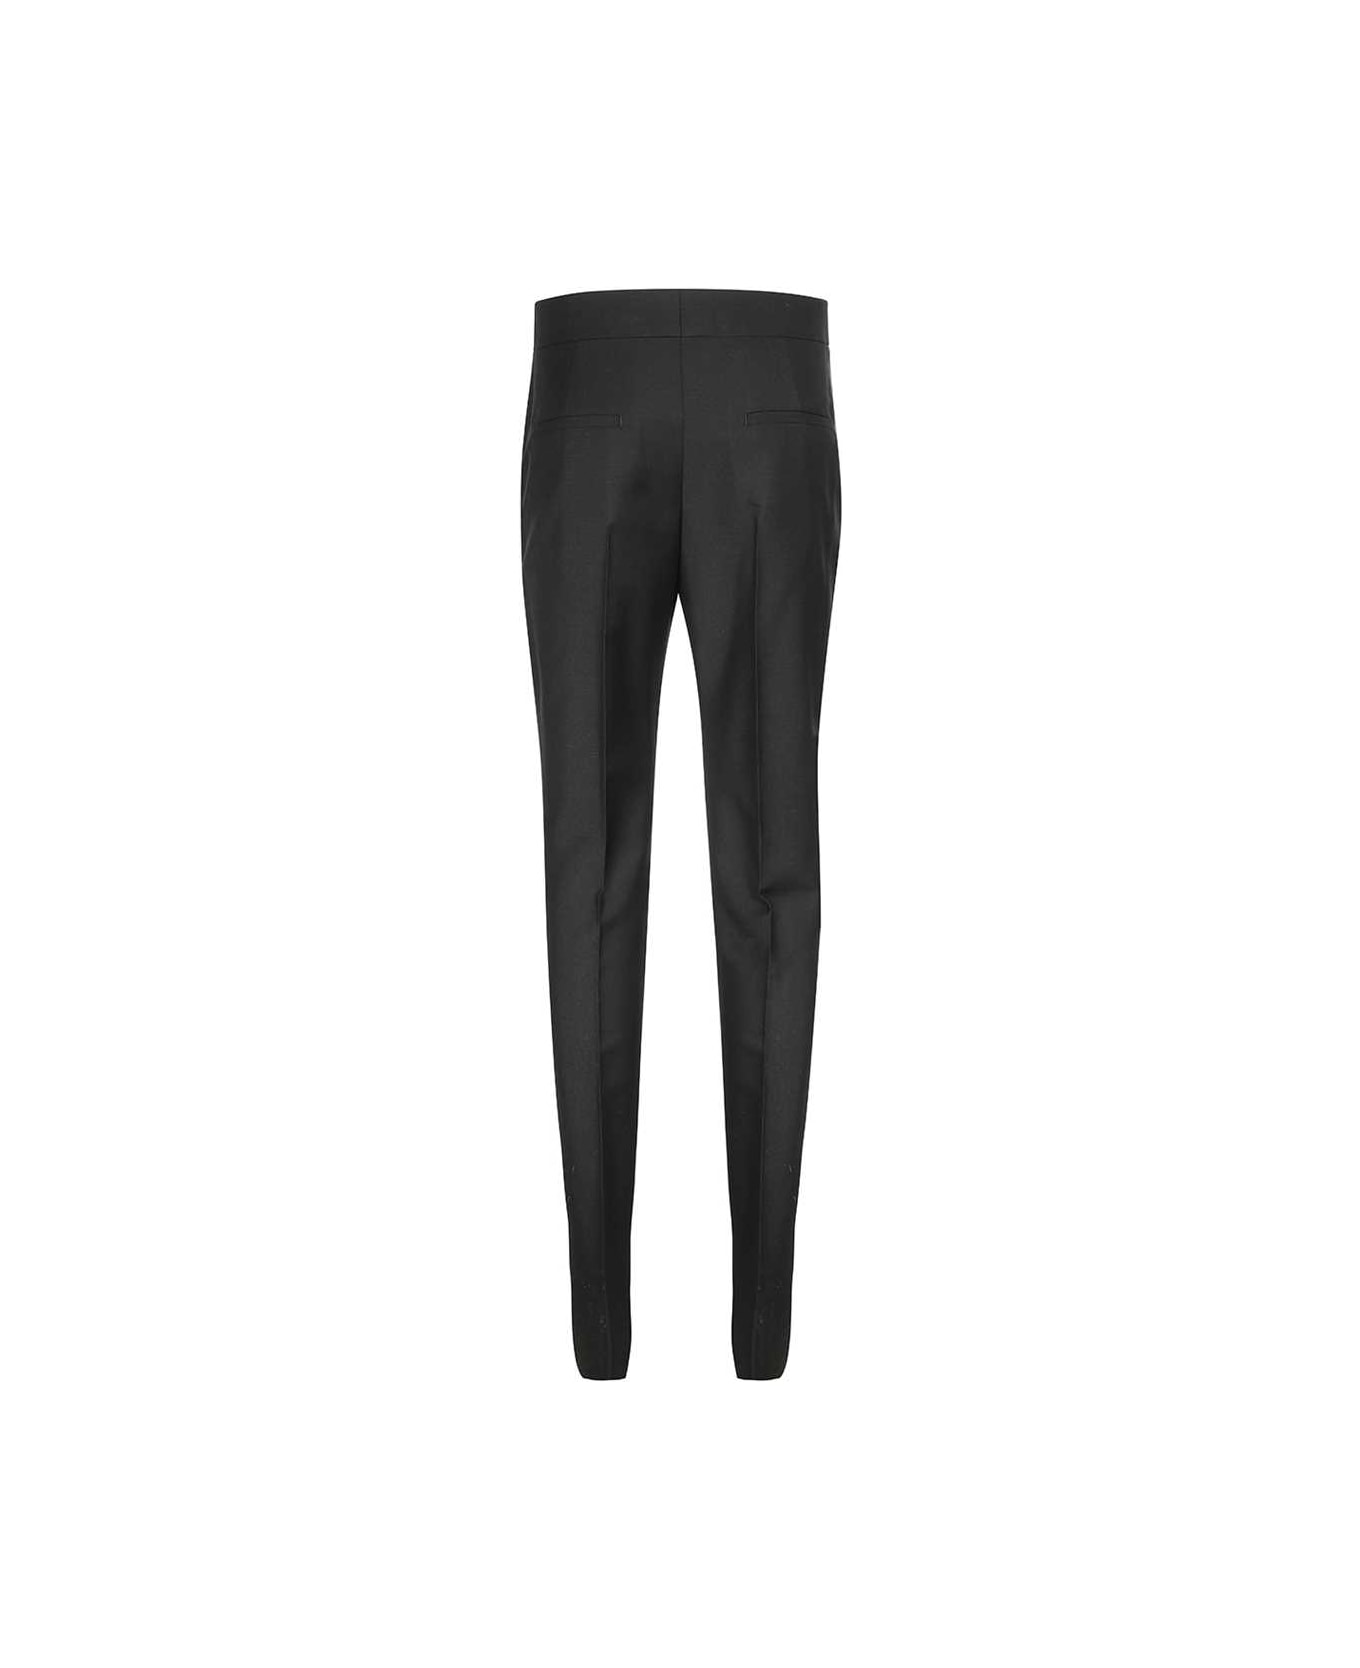 Givenchy Wool Blend Trousers - black